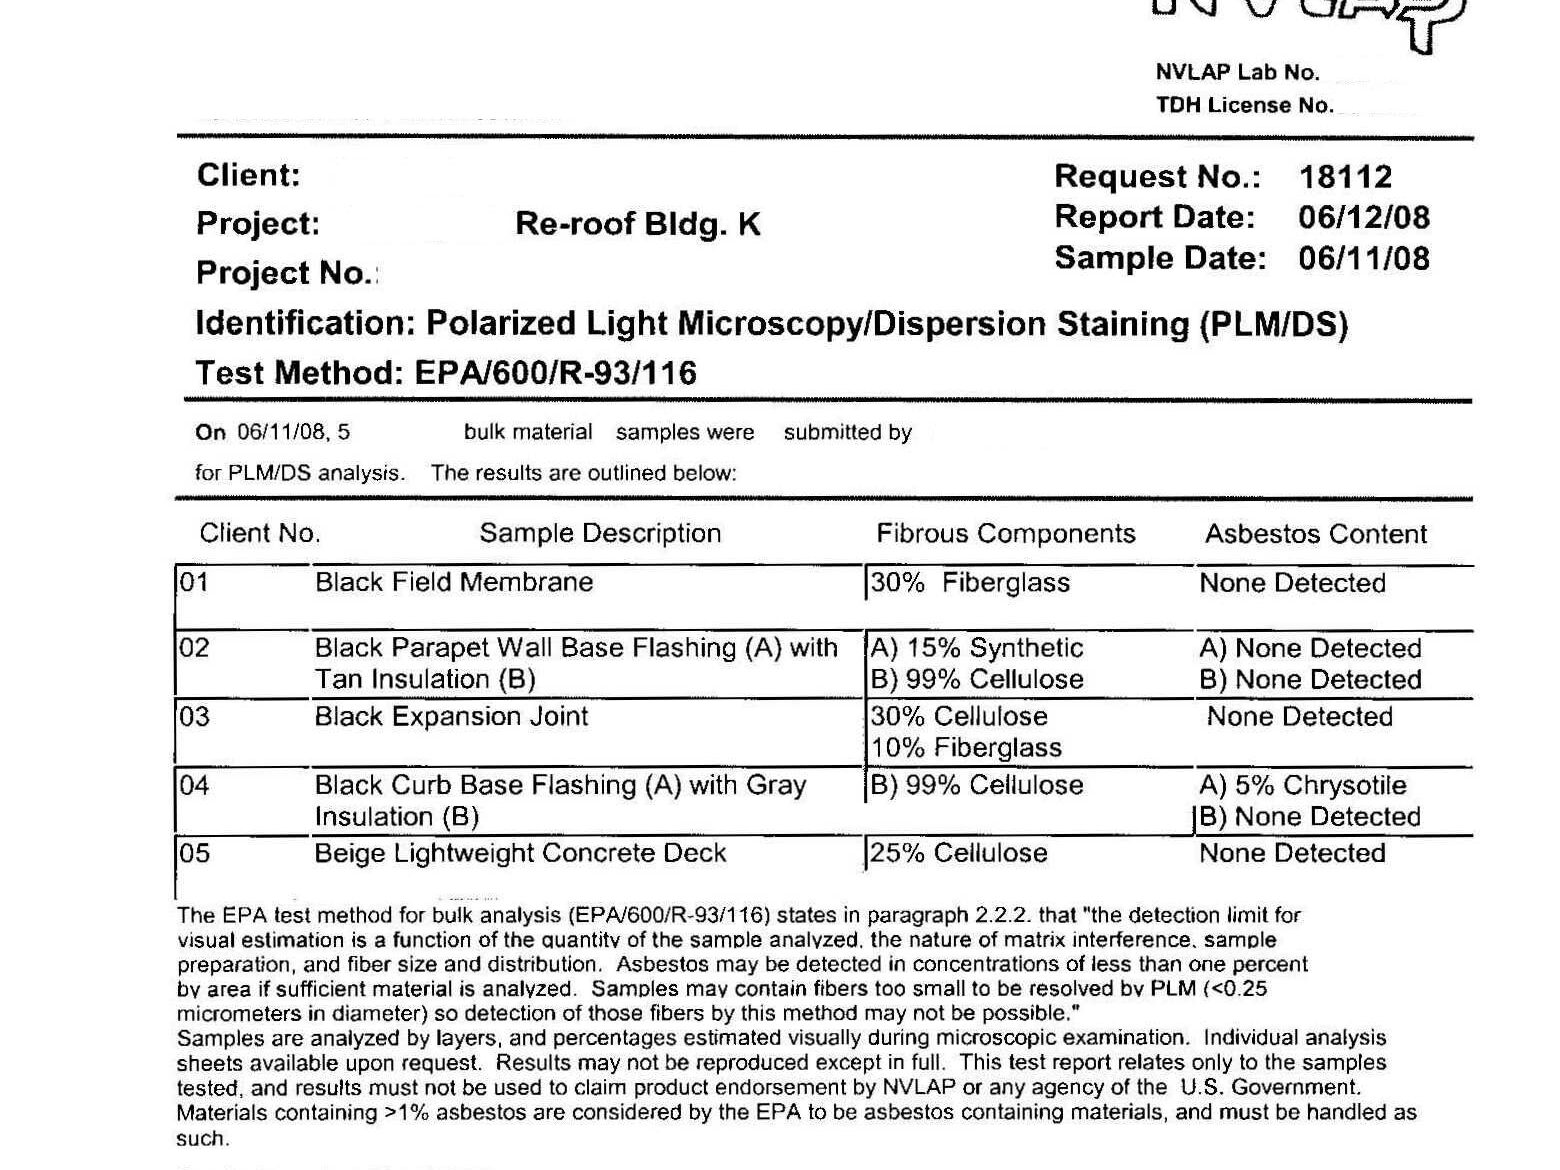 PLM report showing presence of asbestos in the curb base flashing sample from an old built-up roof that is about to be replaced.